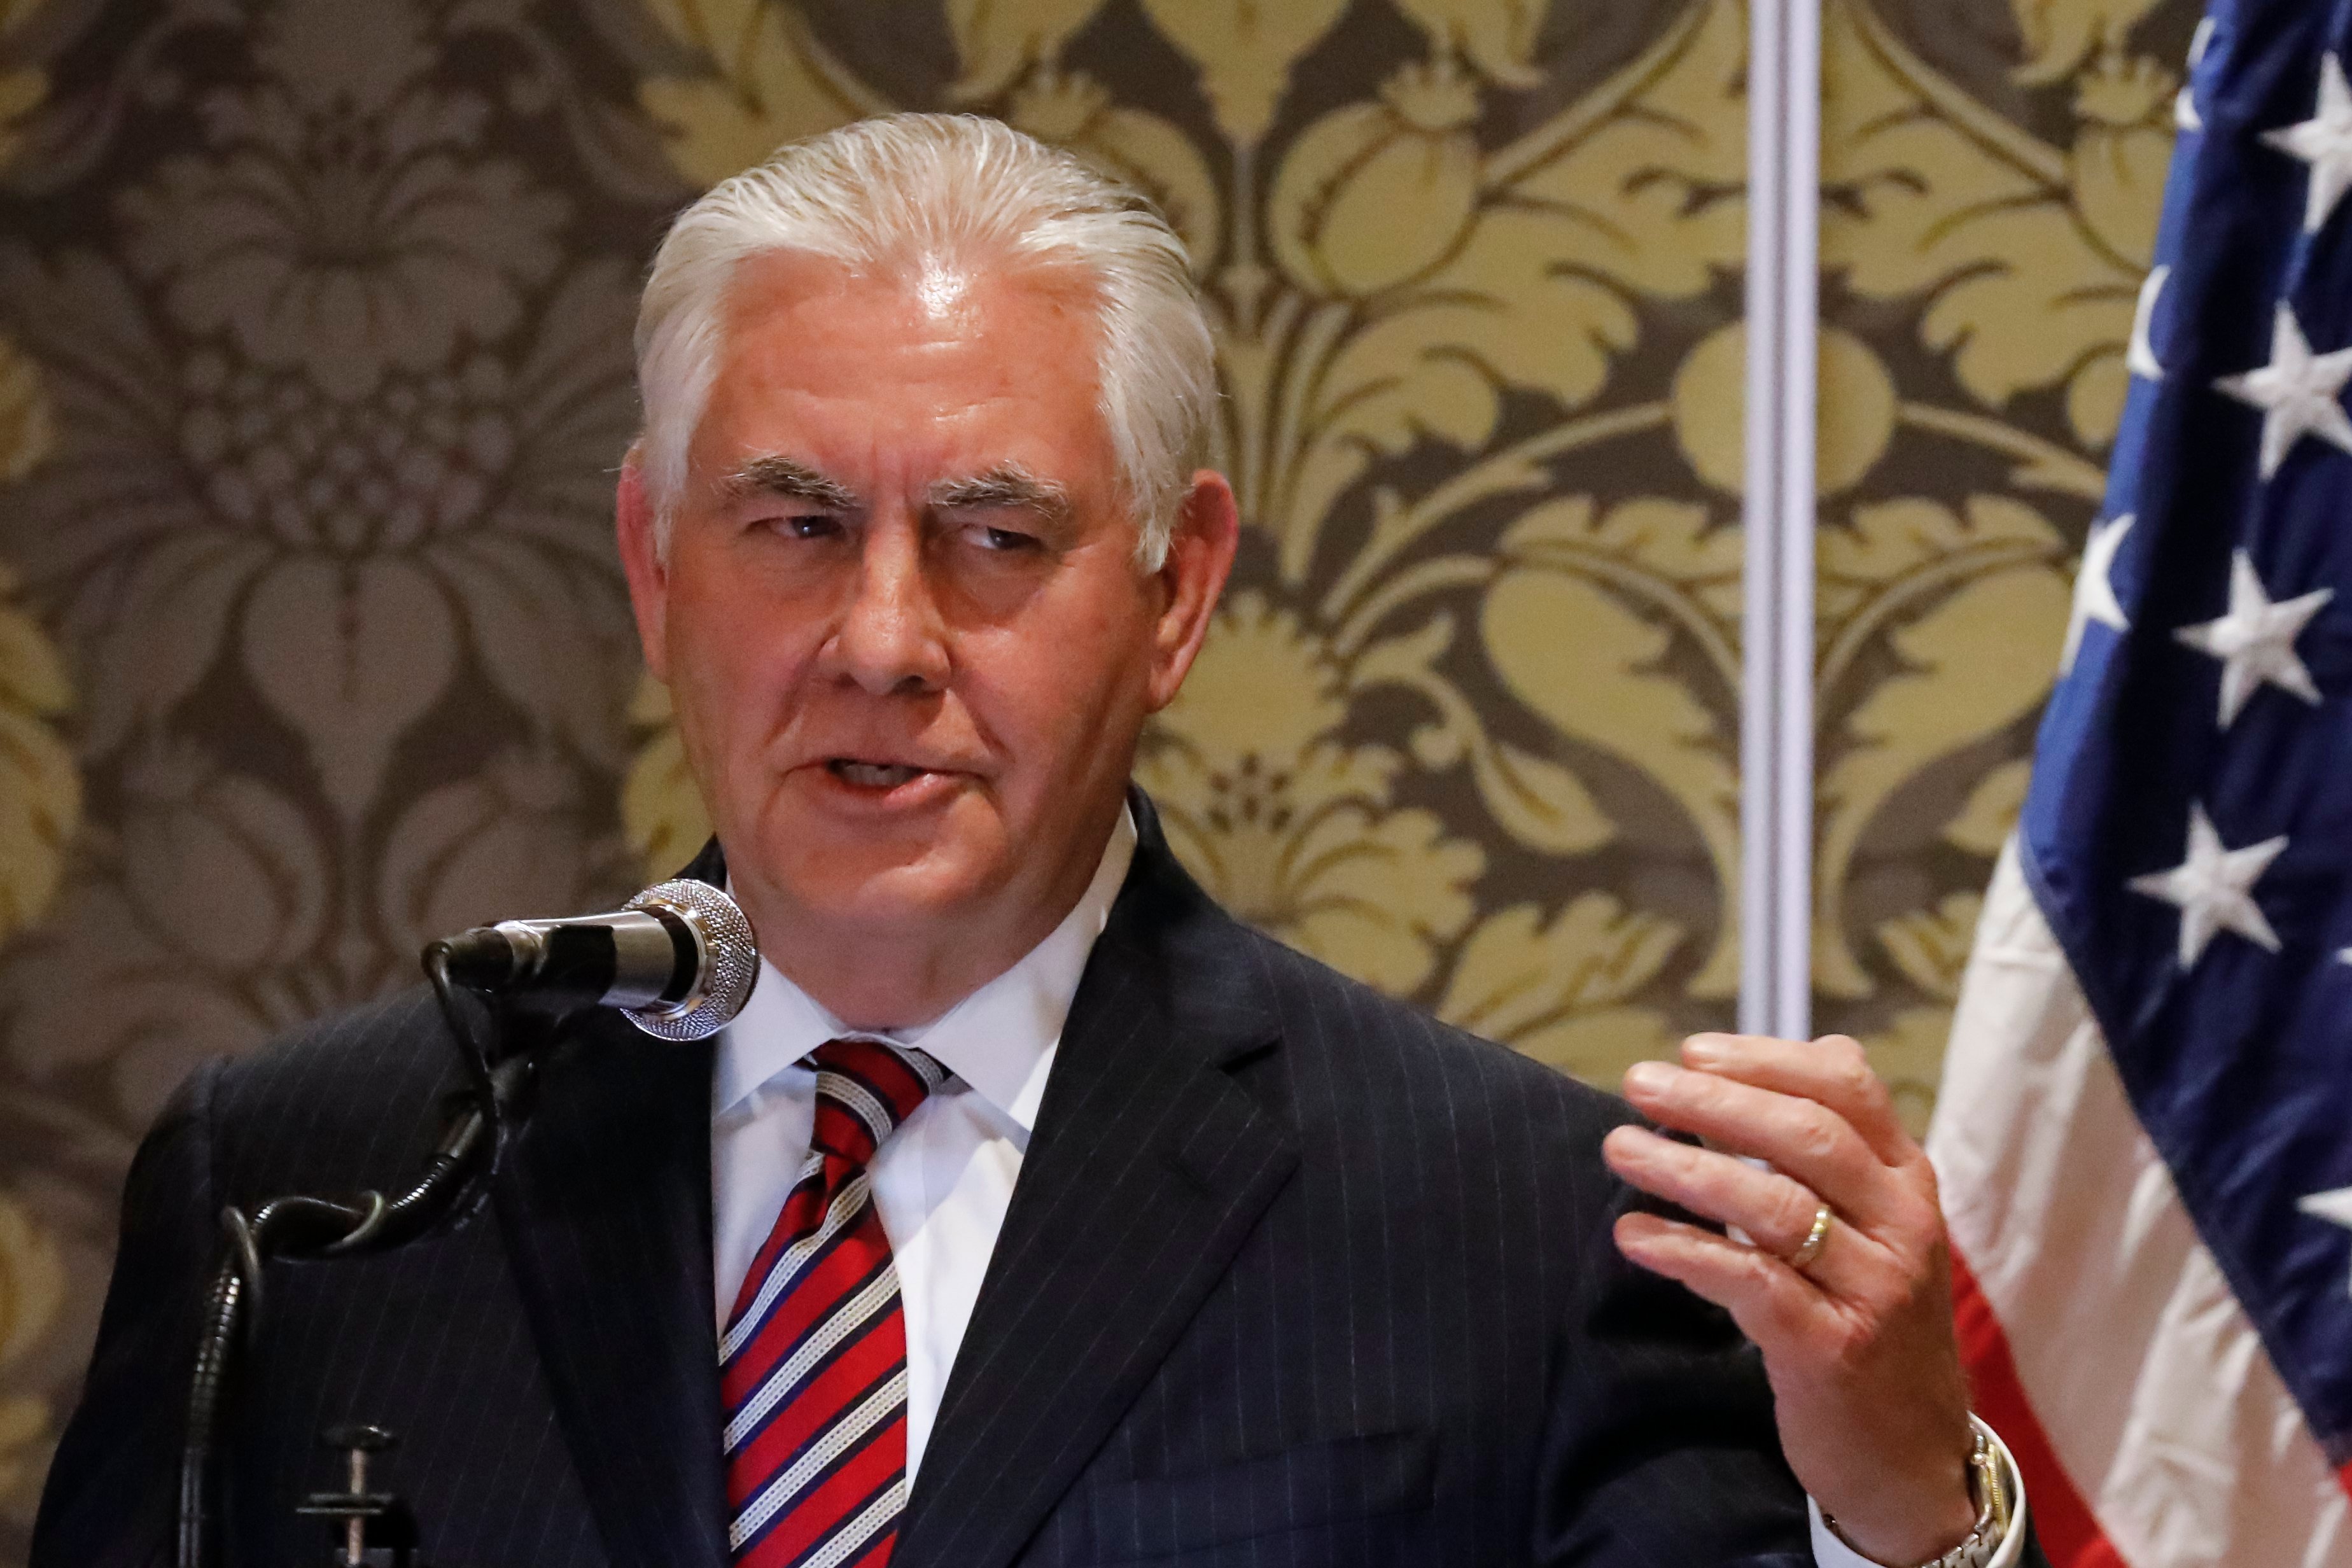 2018-03-09 19:32:53 epa06591863 US Secretary of State Rex Tillerson speaks during a joint news conference with Kenyan foreign minister Monica Juma (not pictured) at a Nairobi hotel in the capital Nairobi, Kenya, 09 March 2018. Tillerson is visiting Kenya on his first official tour of Africa before visiting Nigeria. Tillerson's visit will focus on supporting democratic process in Kenya and press freedom among others, US government said in a statement. EPA/DAI KUROKAWA